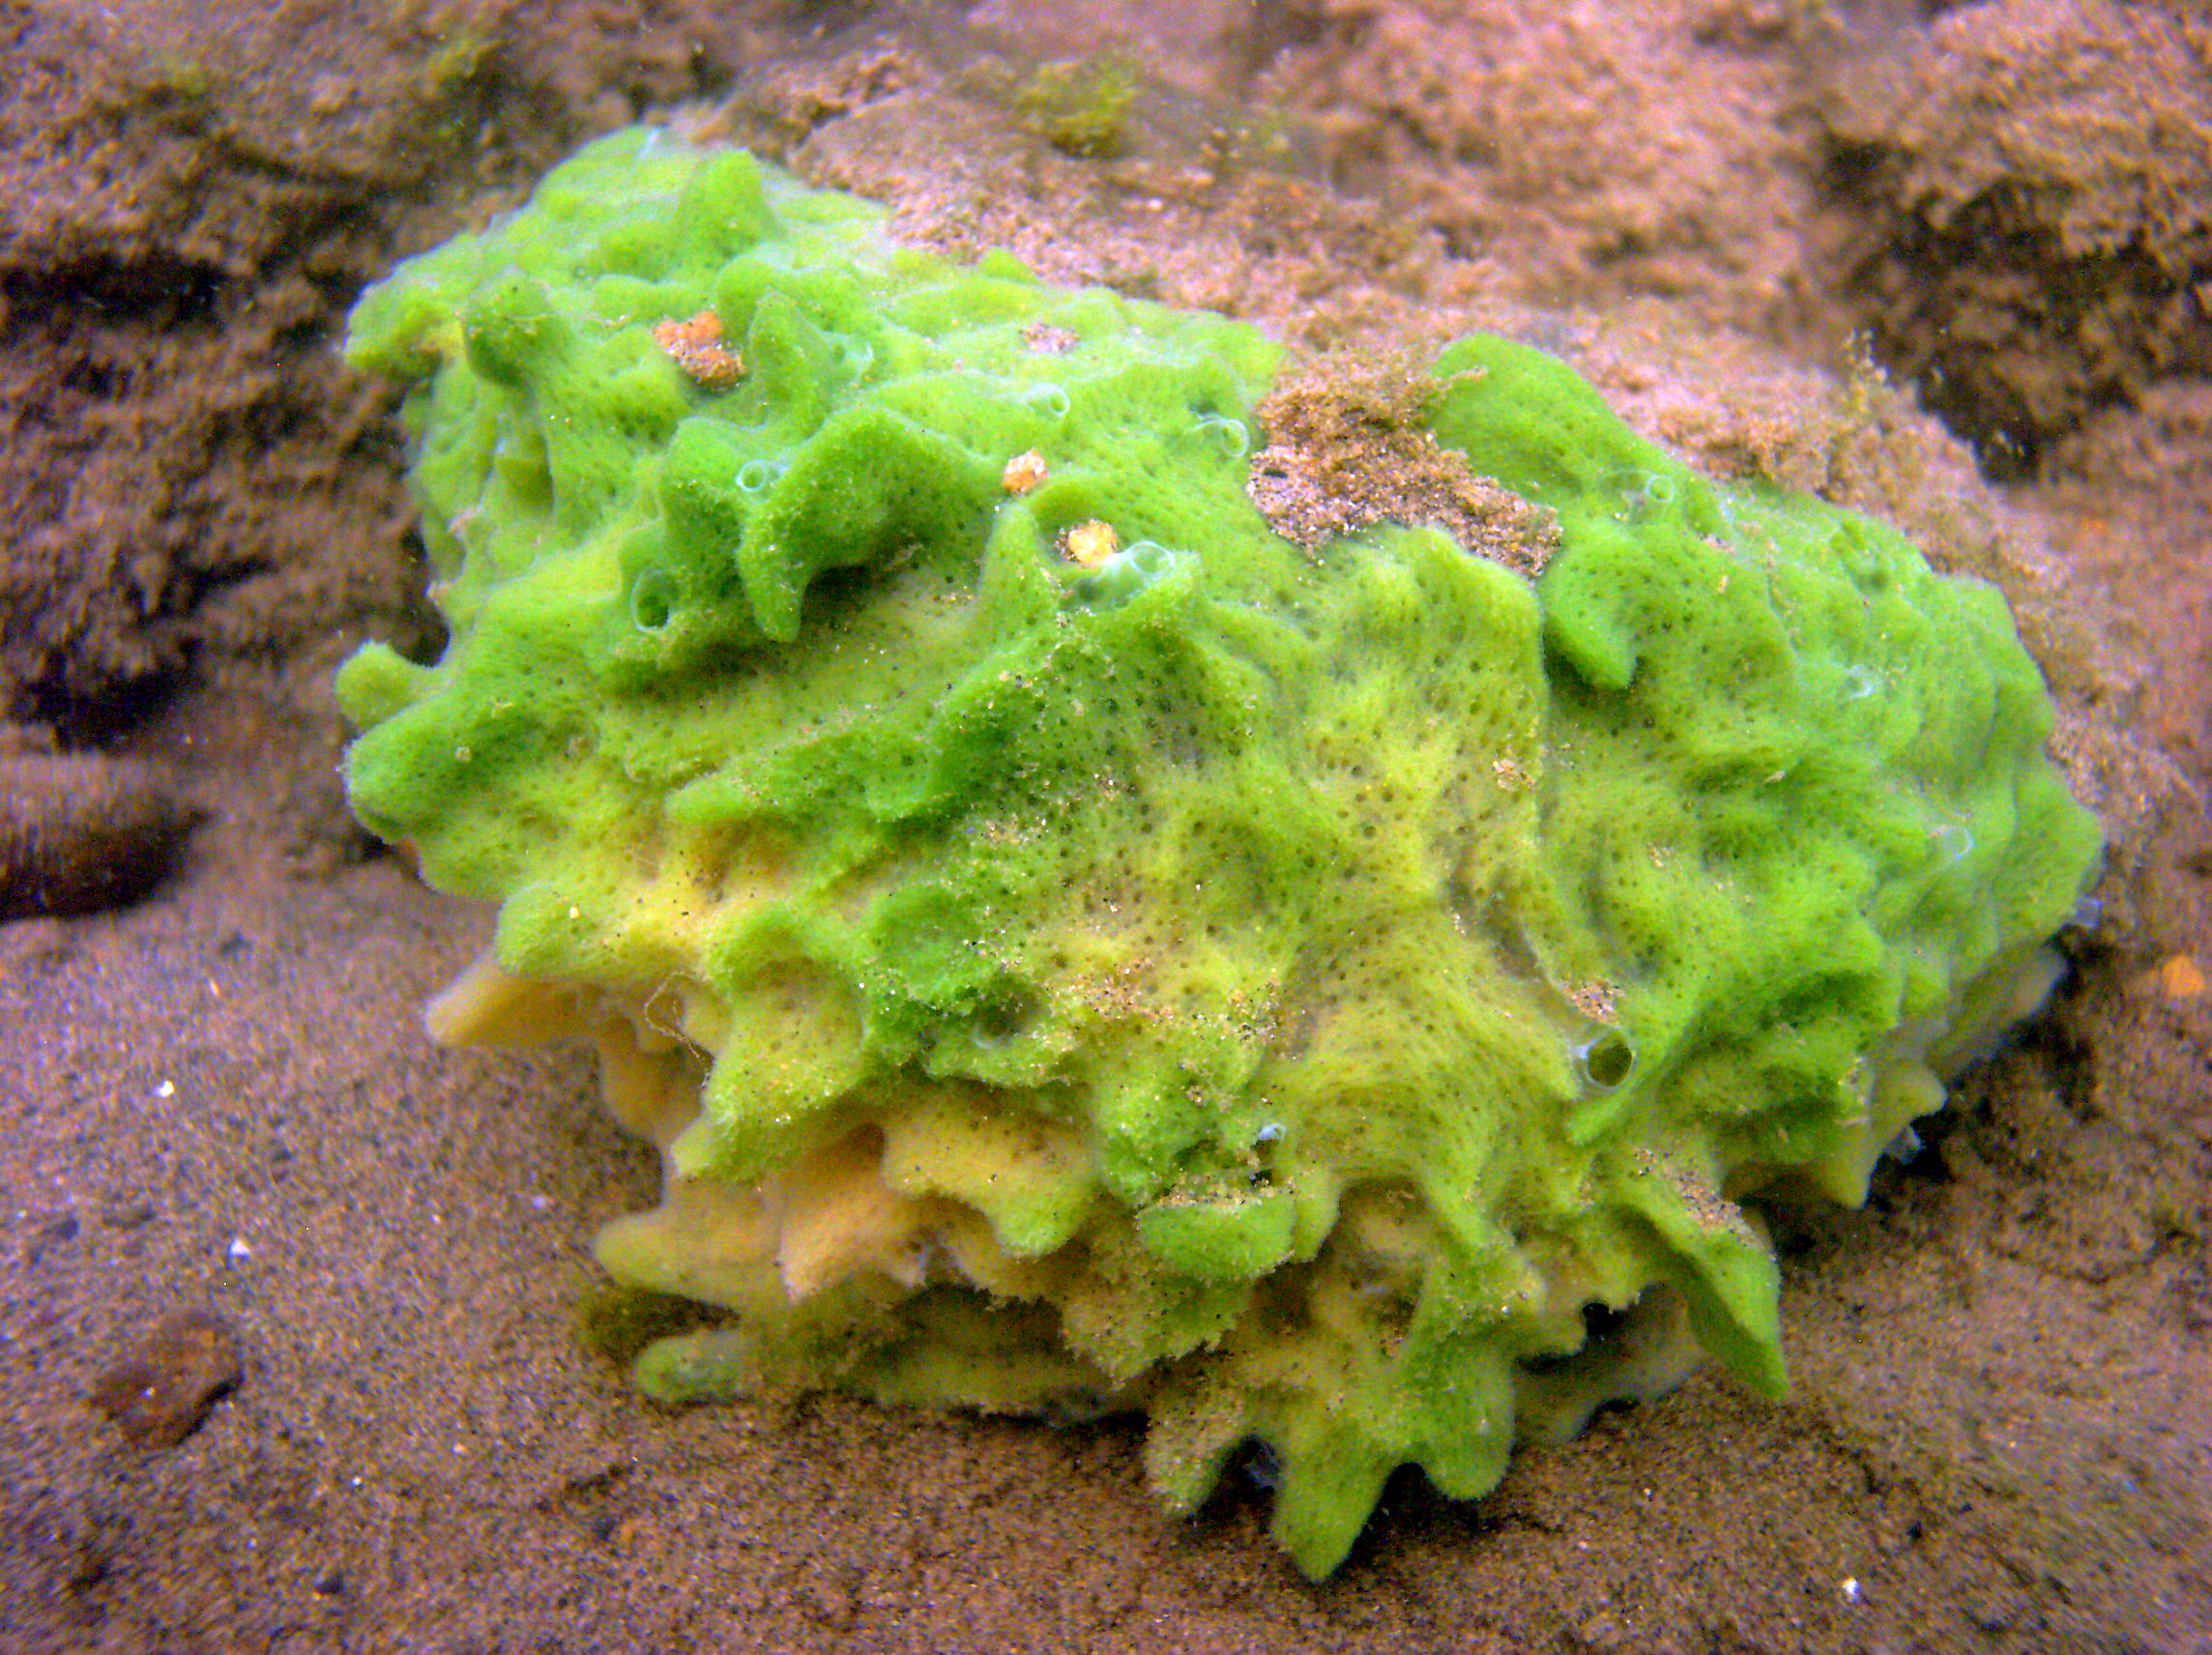 Are sponges found in freshwater?